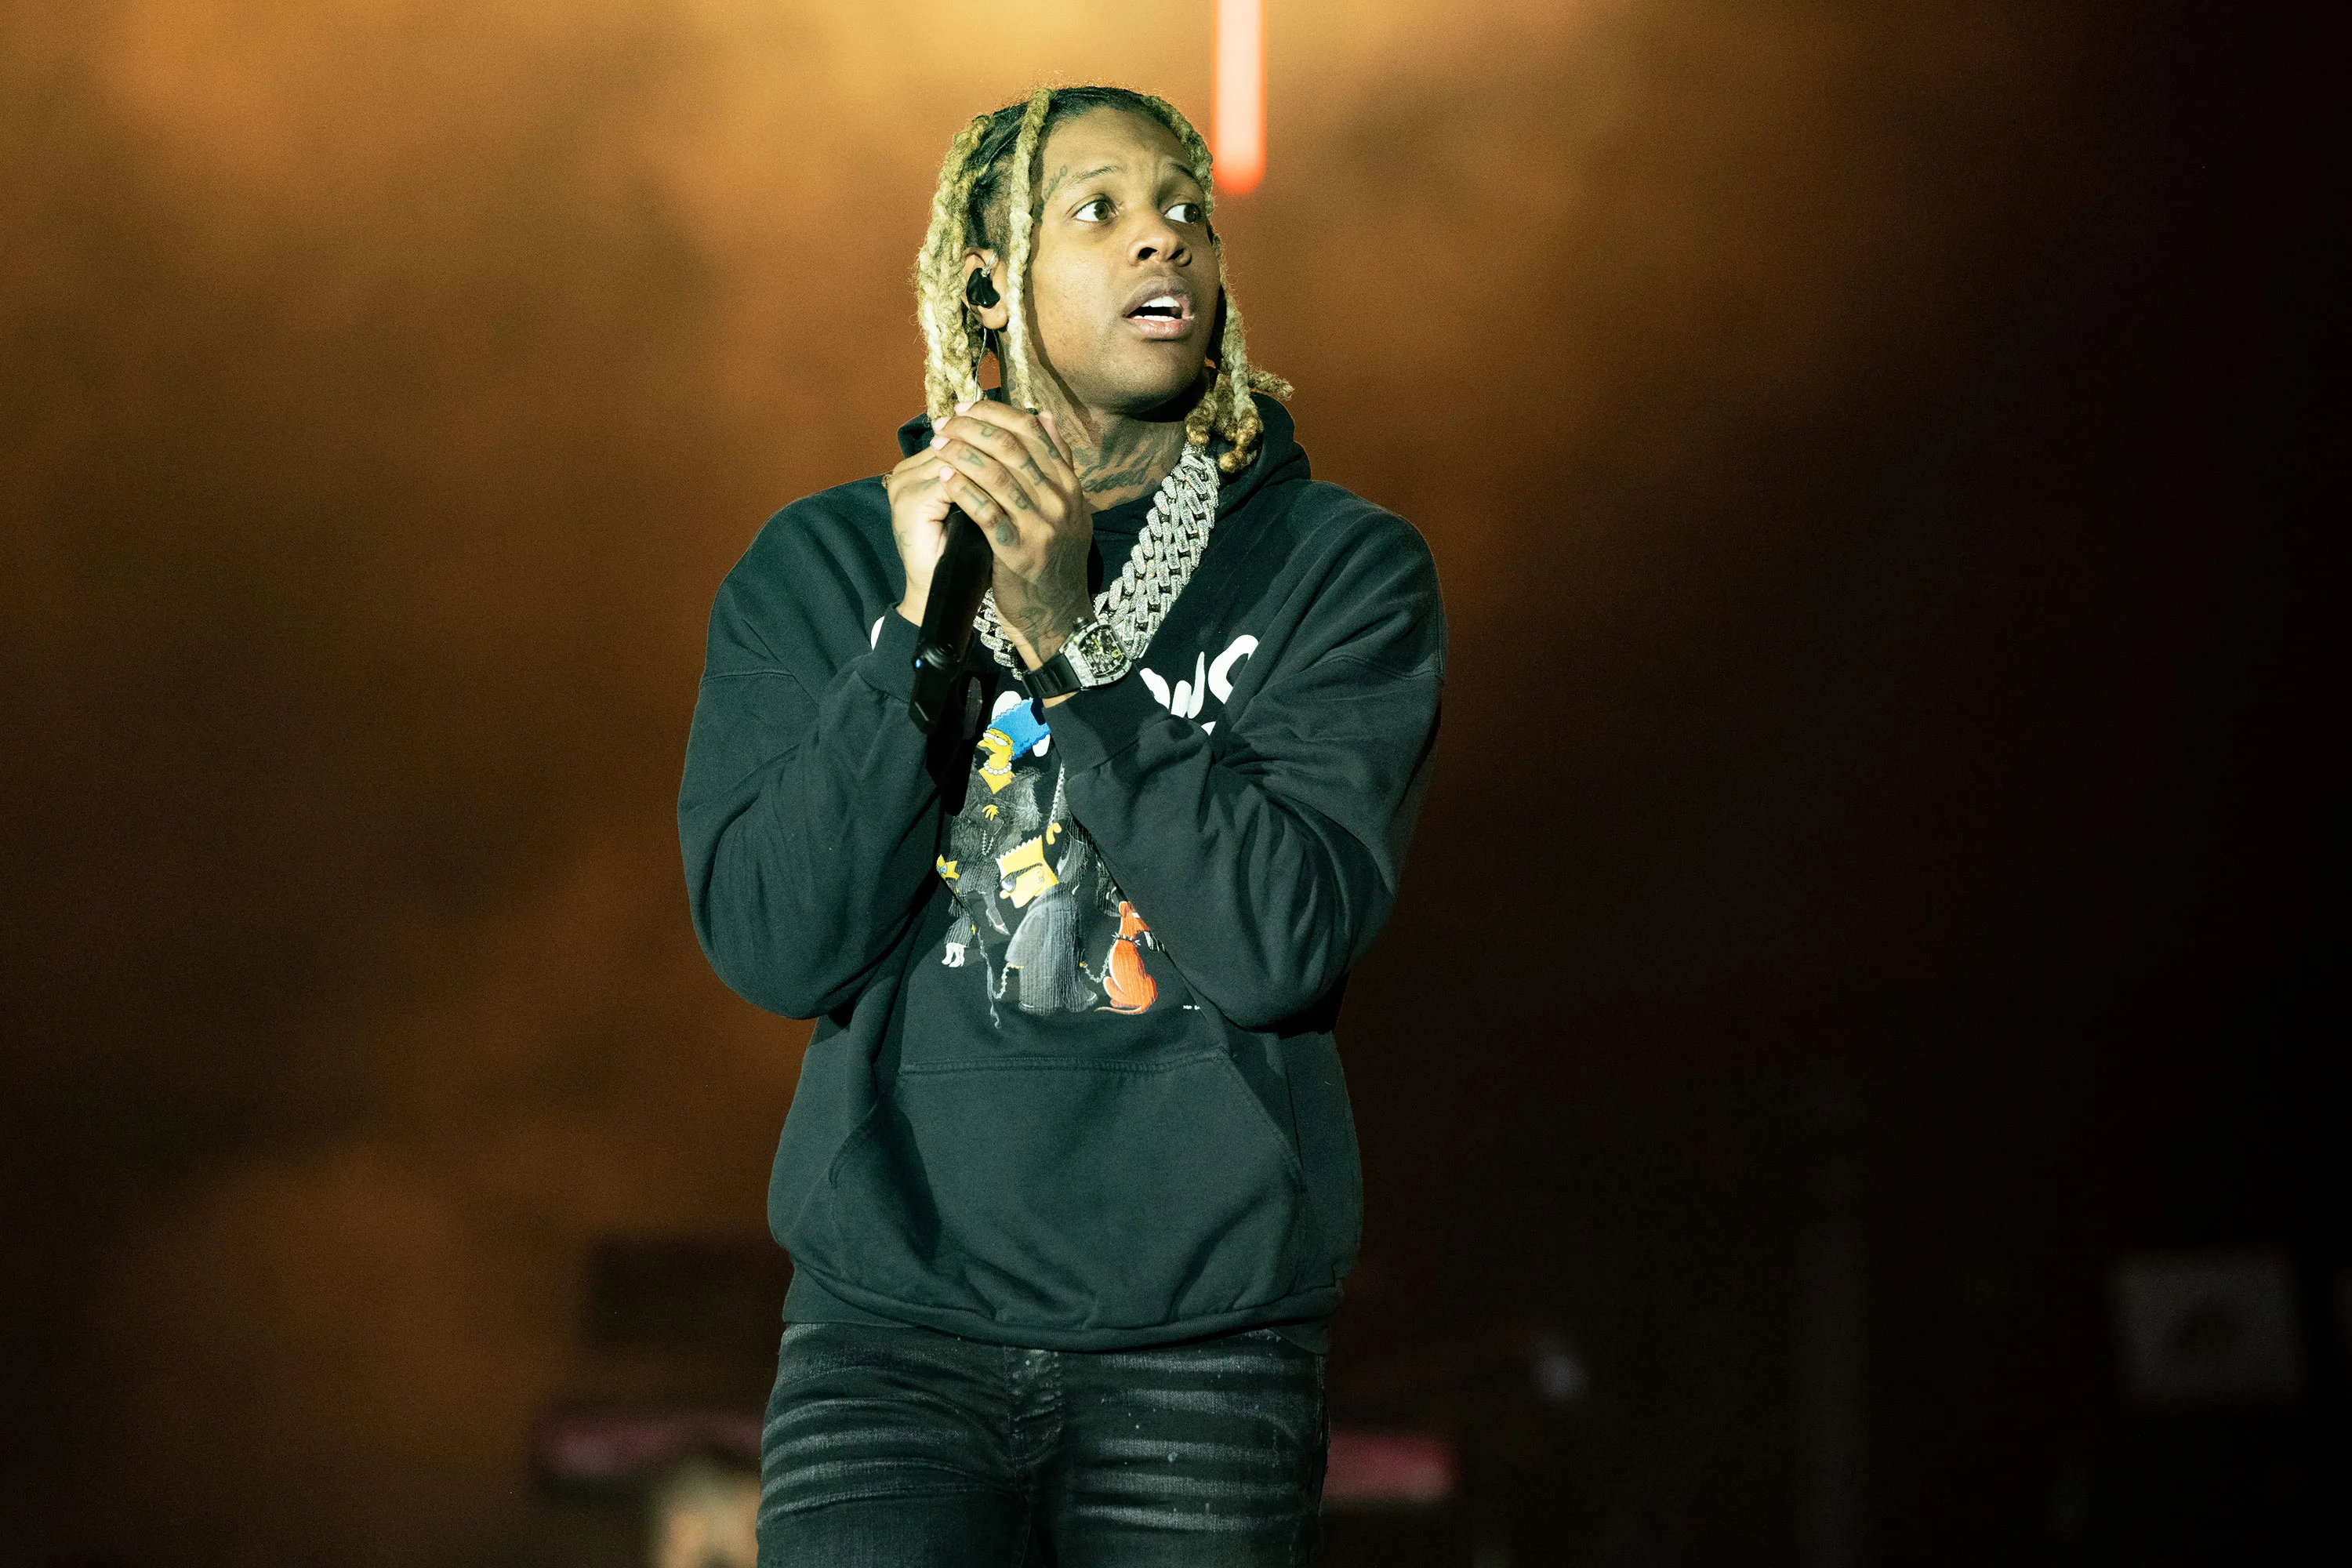 Lil Durk to Donate Portion of “Bedtime” Royalties to Neighborhood Heroes Foundation as Part of New Partnership